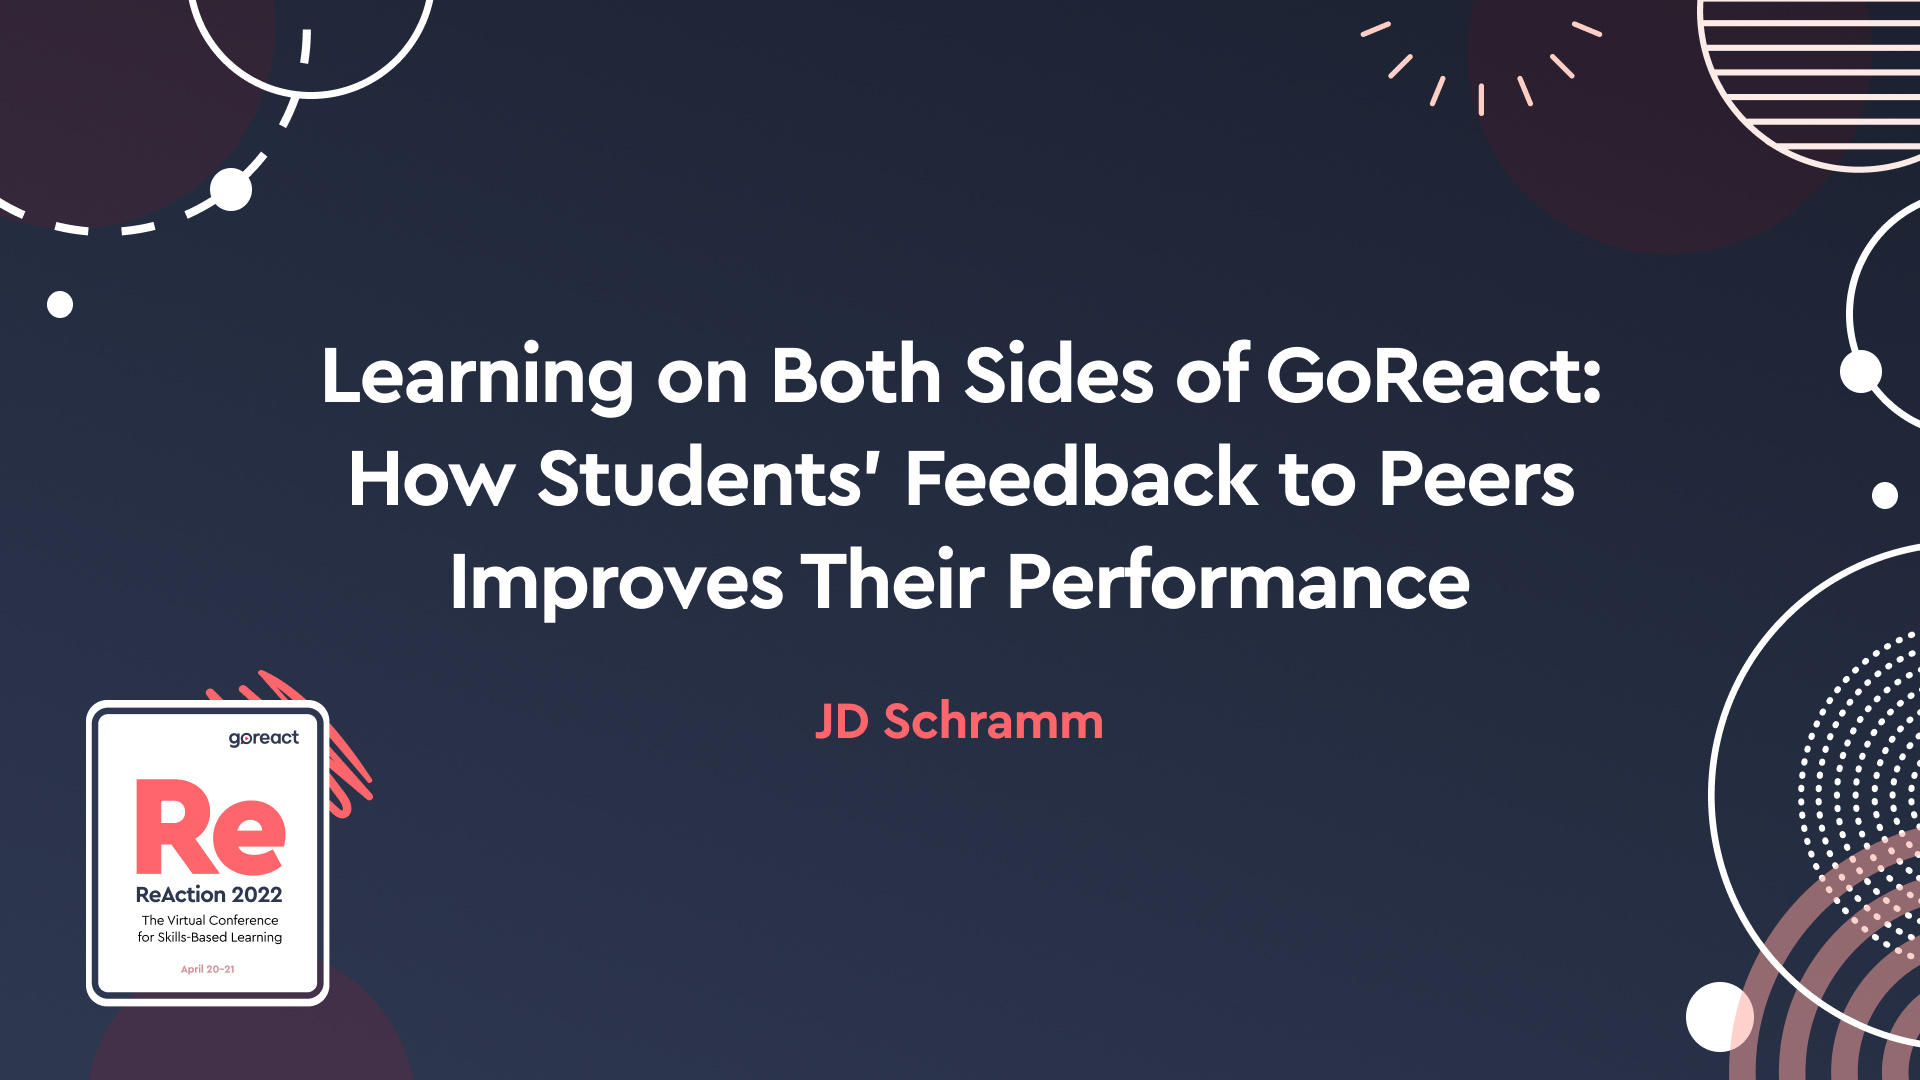 Learning on Both Sides of GoReact: How Students’ Feedback to Peers Improves Their Performance